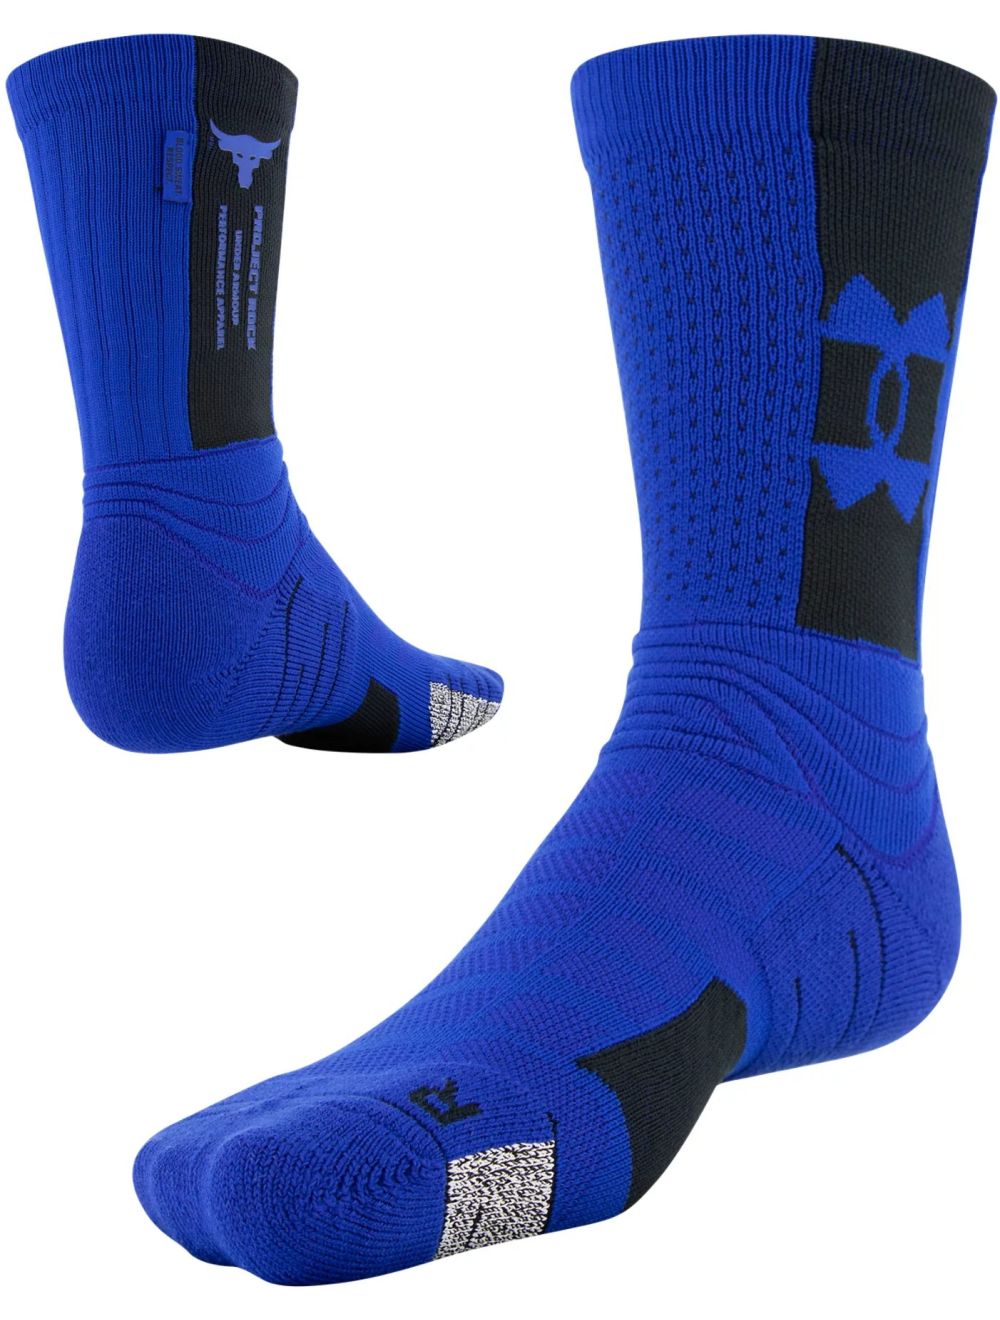 Under Armour Unisex UA Playmaker Project Rock Crew Socks - Newest Products